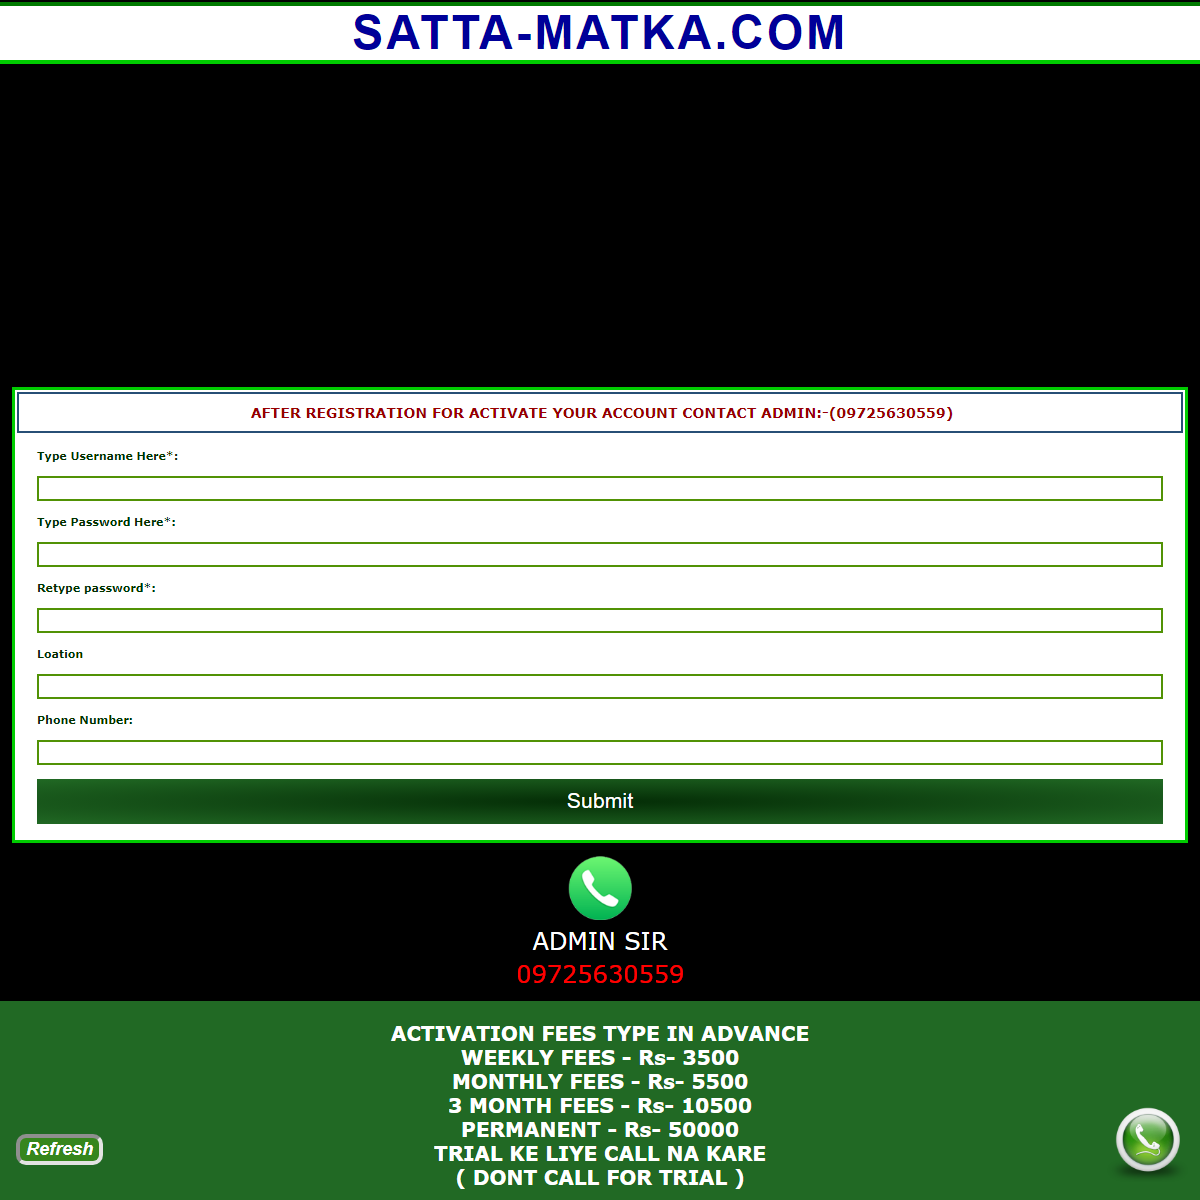 A complete backup of http://satta-matka.com/forum/register.php